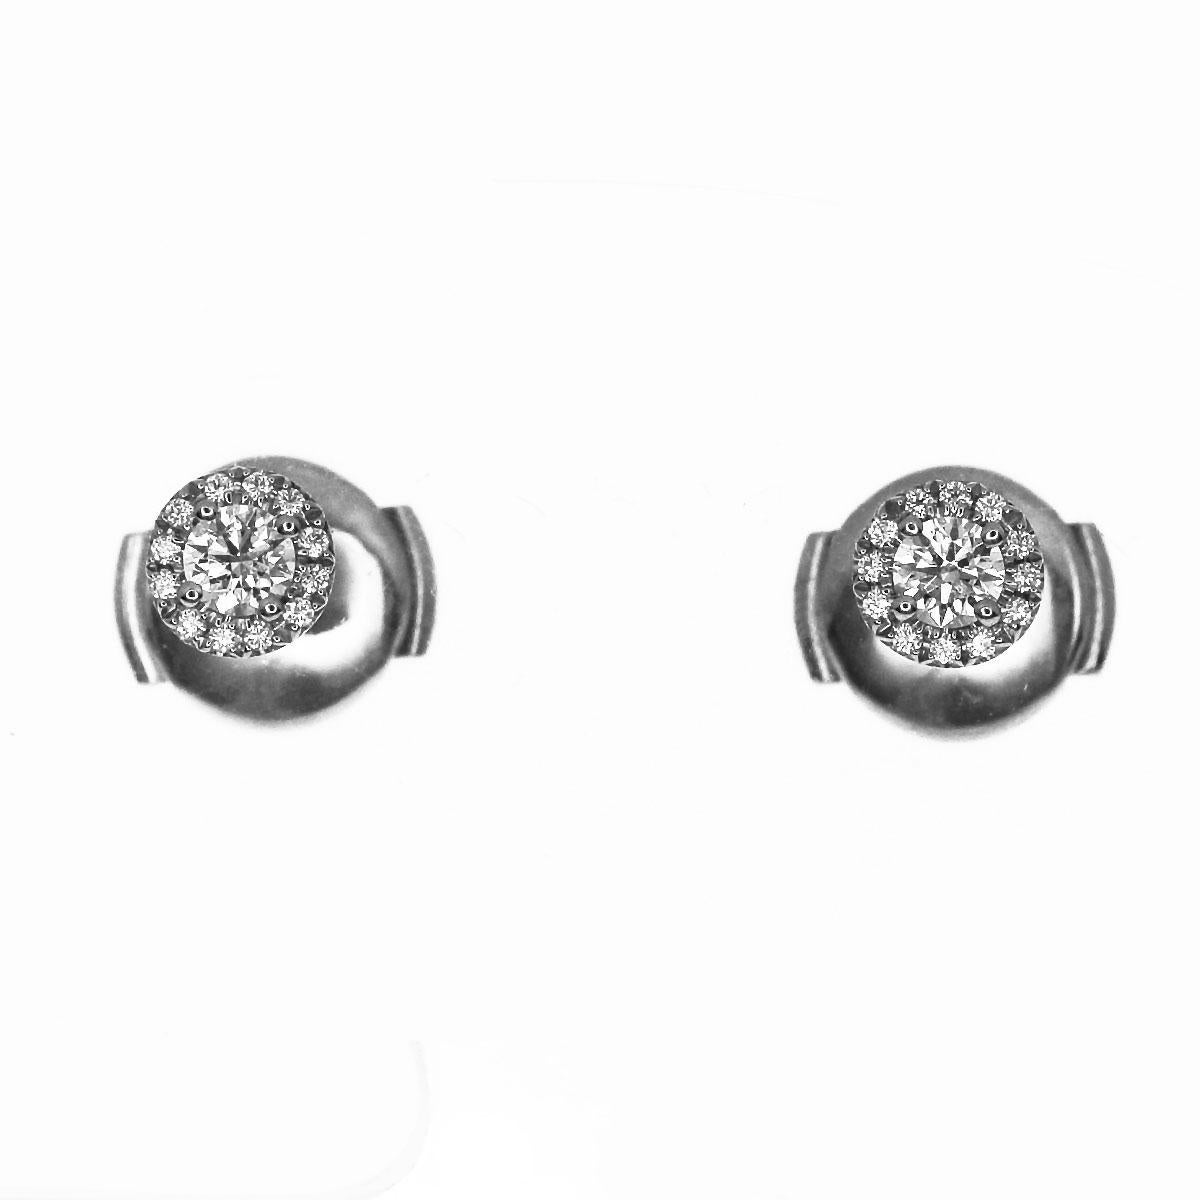 Brand:TIFFANY&Co.
Name:Soleste Studs Earring Mini
Retail Price: JPY324,500Yen (include tax)
Material:Diamond (D0.17ct), PT950 Platinum
Weight:2.4g(Pair)（Approx）
Top Size of Diameter : 4.76mm /  0.18